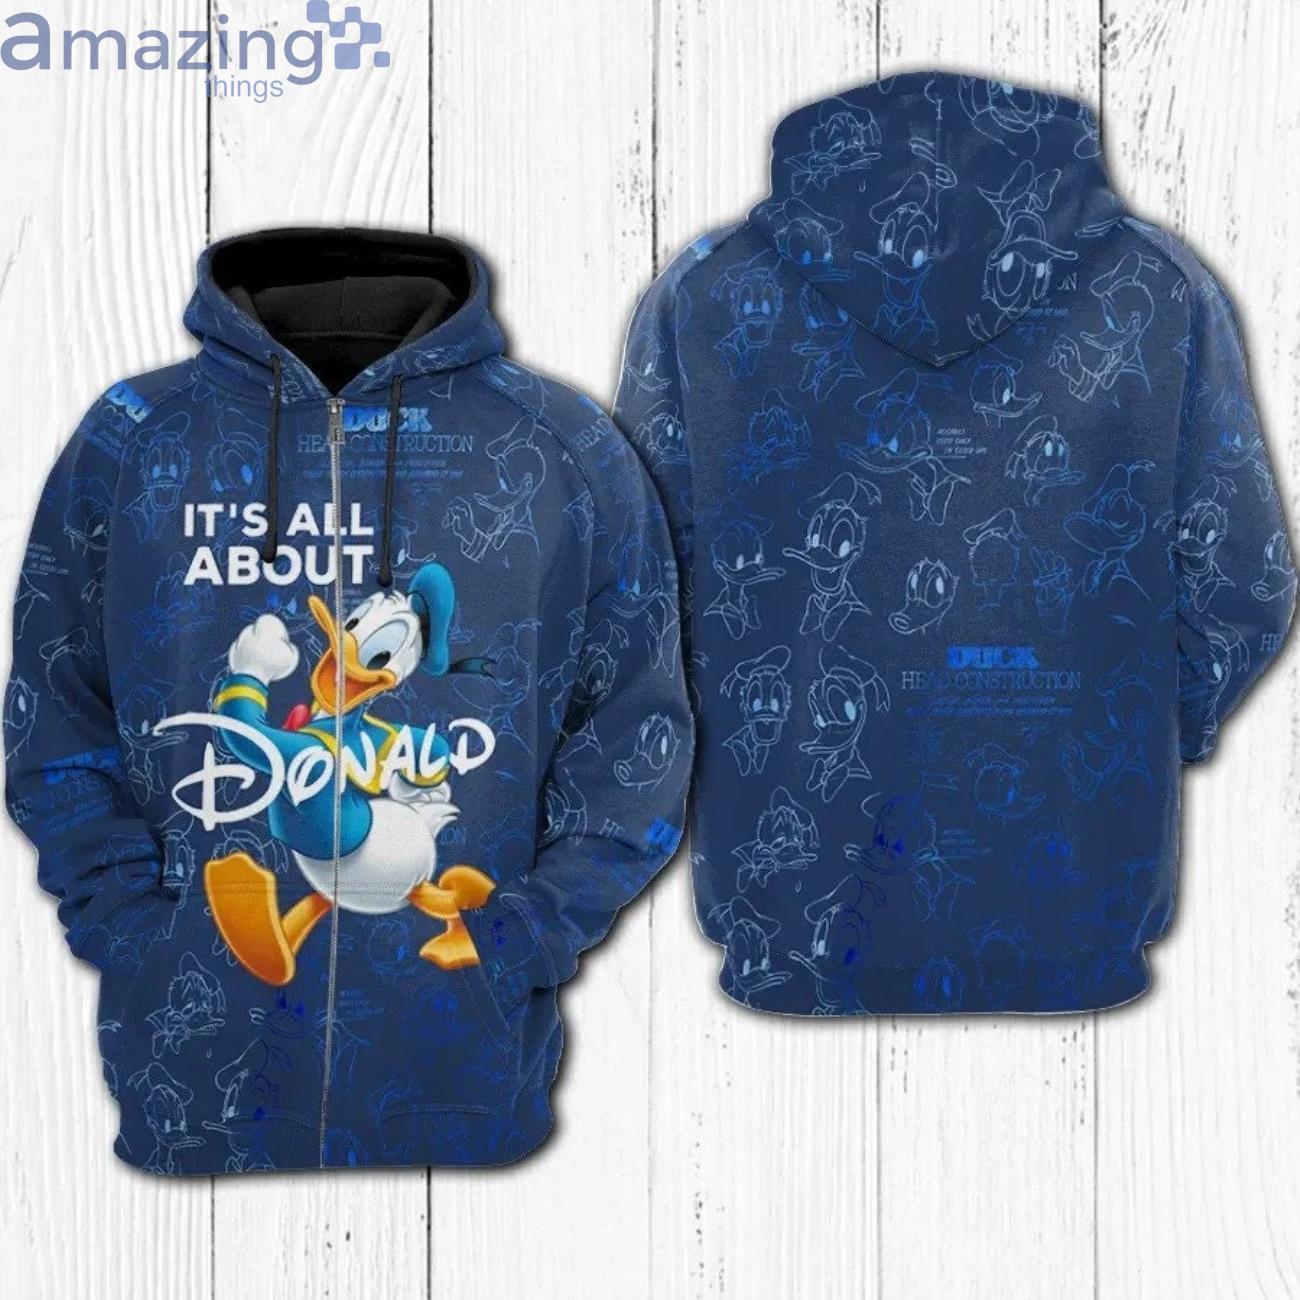 All About Donald Duck Disney Cartoon Graphic 3D Hoodie Zip Hoodie Product Photo 1